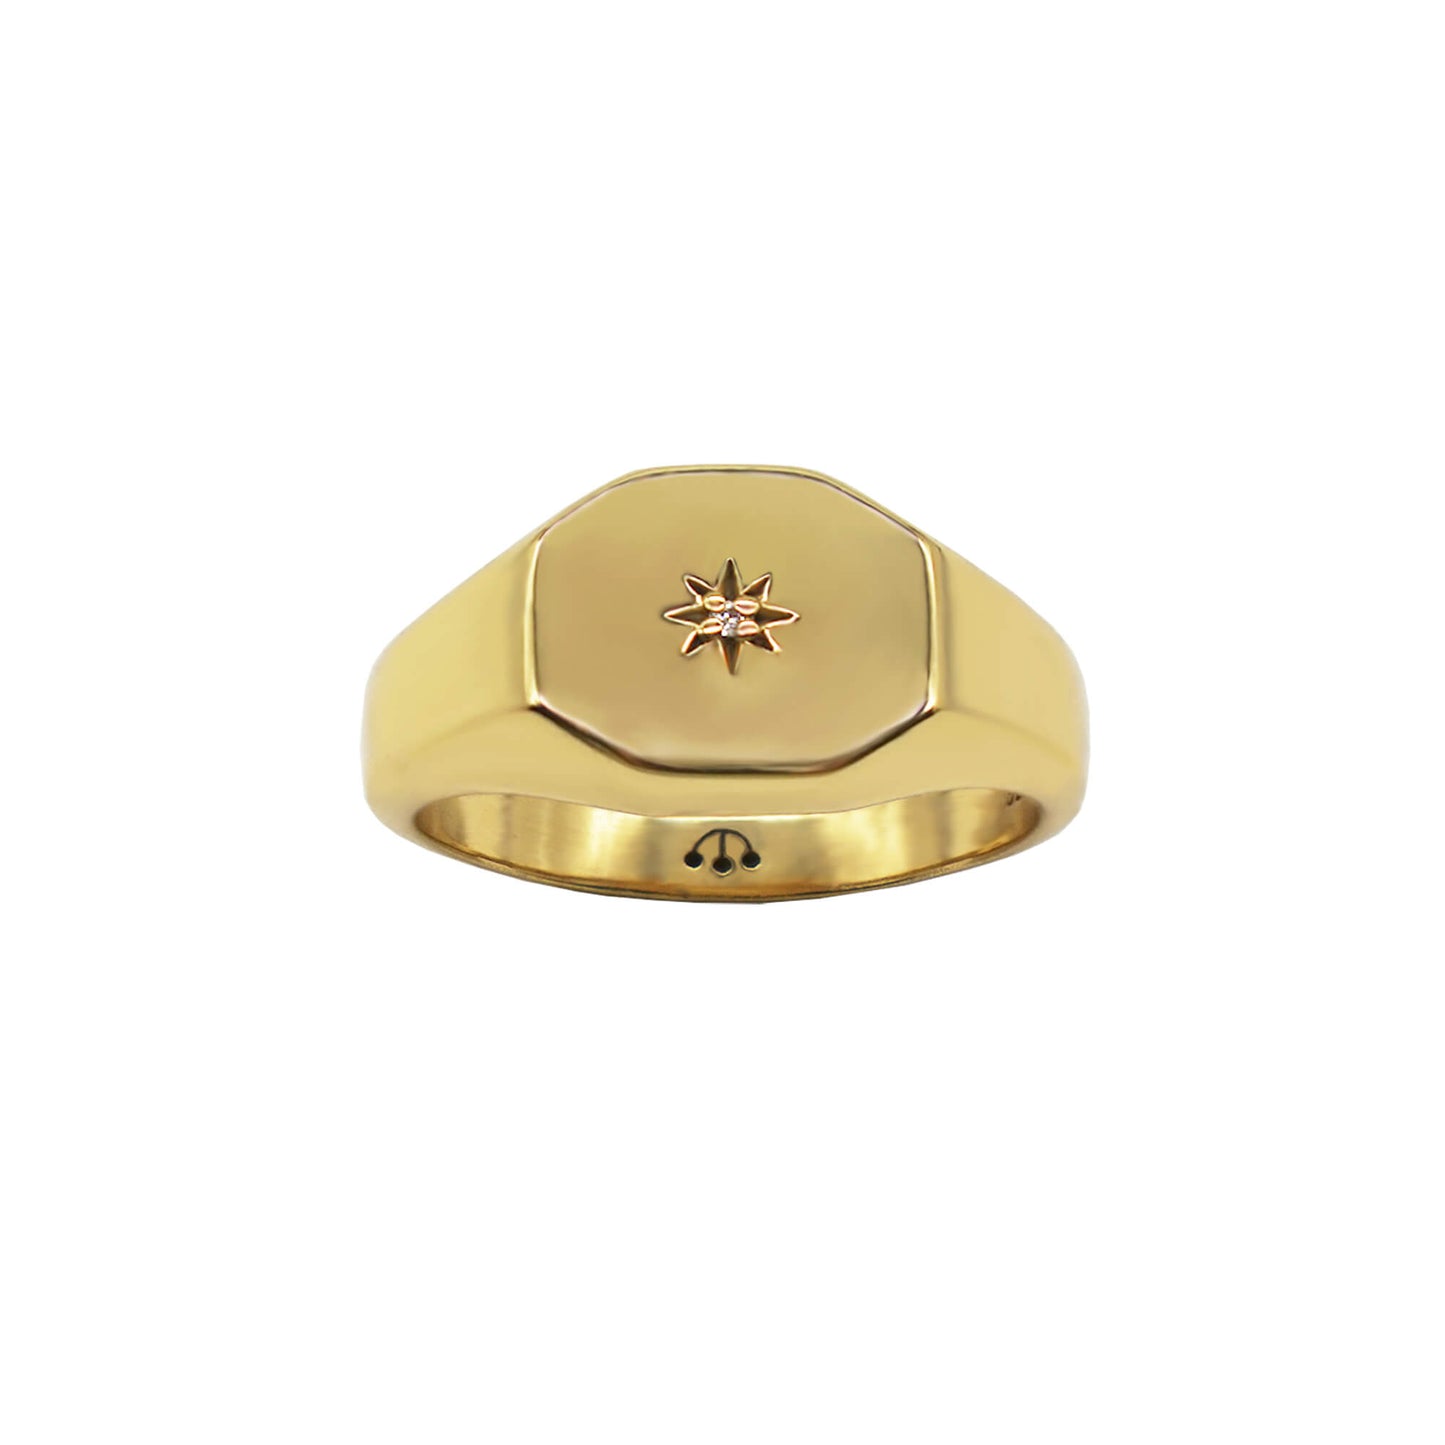 PAWNSHOP GOLD SIGNATURE GOLD OCTAGON PINKY RING WITH STARBURST CENTRE, PAWNSHOP 3 BALL LOGO SHOW ON INNER BAND.